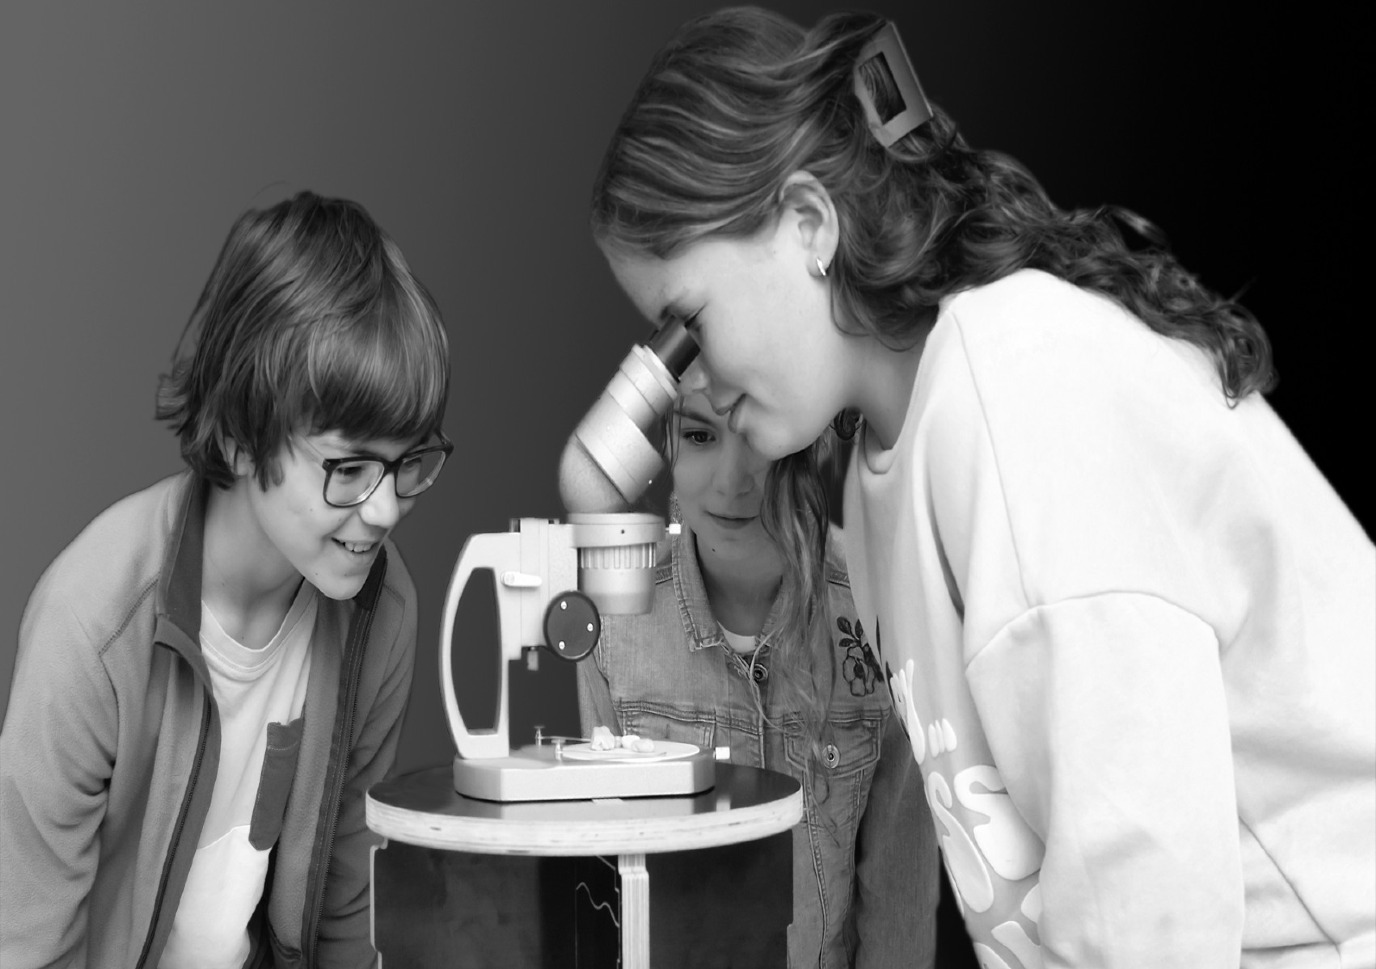 Photo of children with microscope